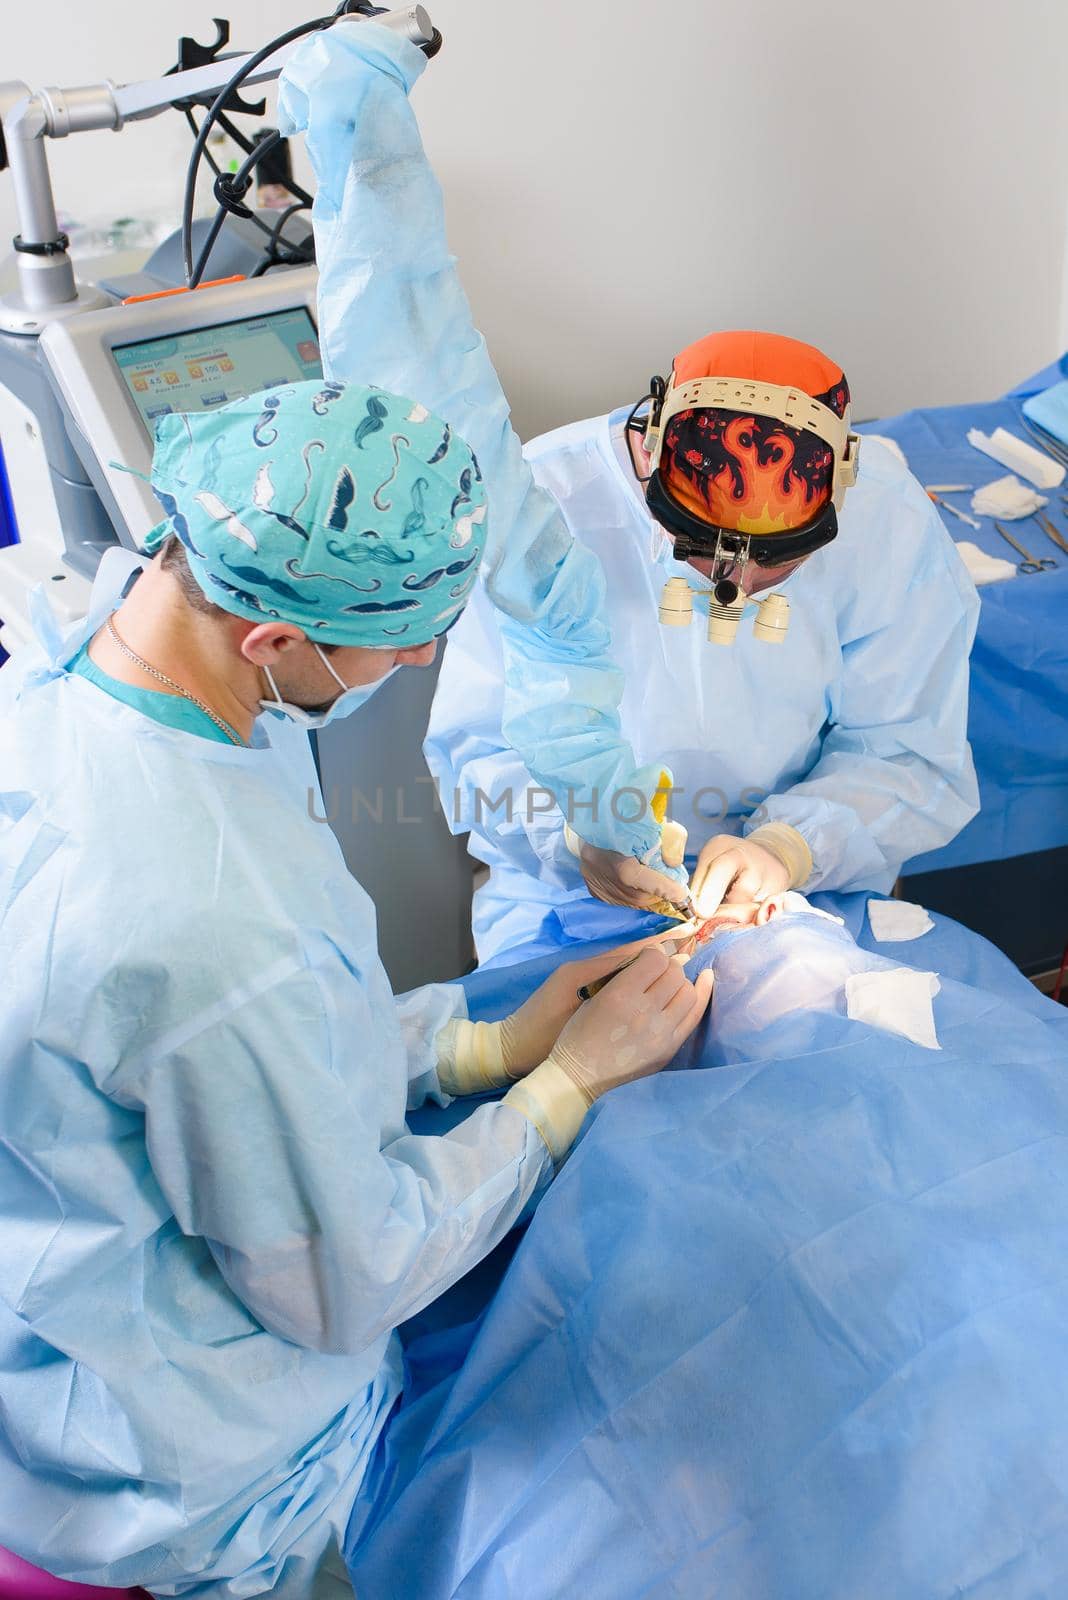 Laser Blepharoplasty, plastic surgery operation for correcting defects, deformities, and disfigurations of the eyelids.